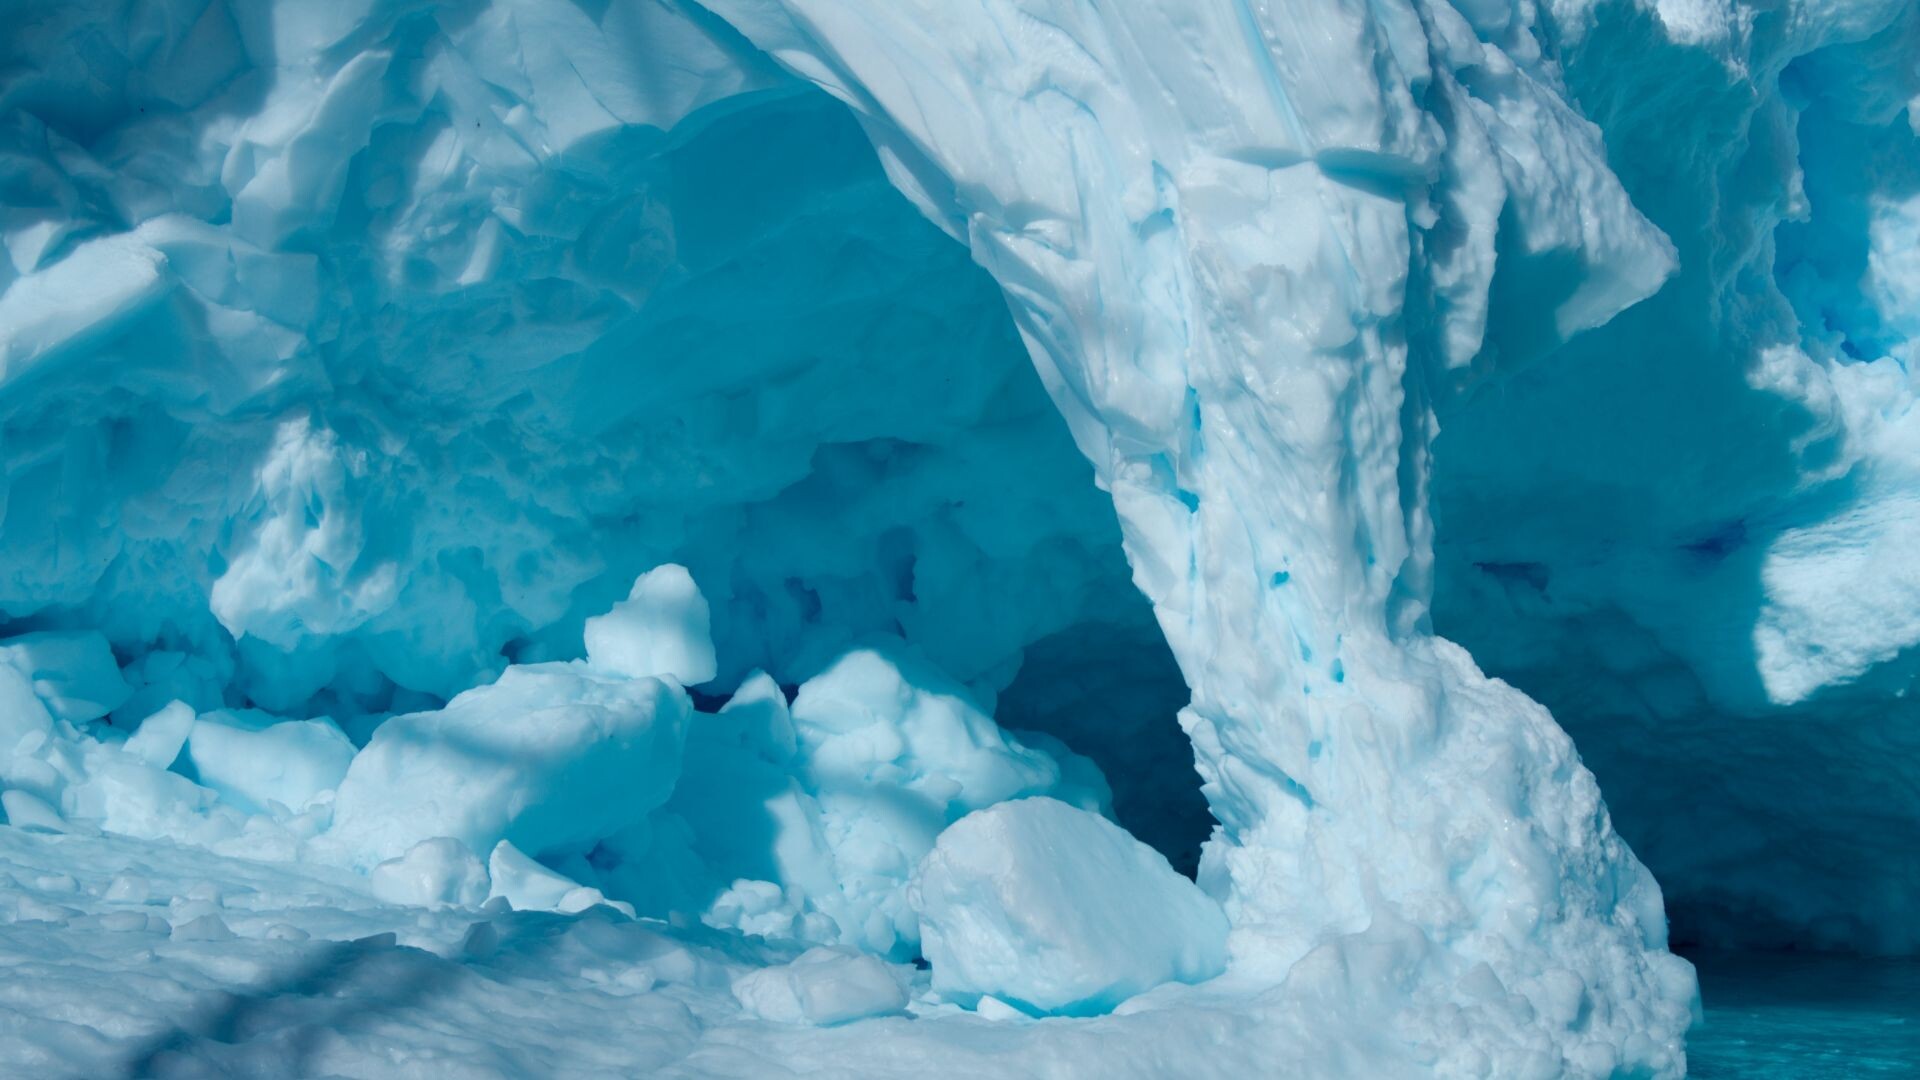 Glacier: Nature, Snow, Blue ice, Massive body of slowly moving ice, Frozen water. 1920x1080 Full HD Background.